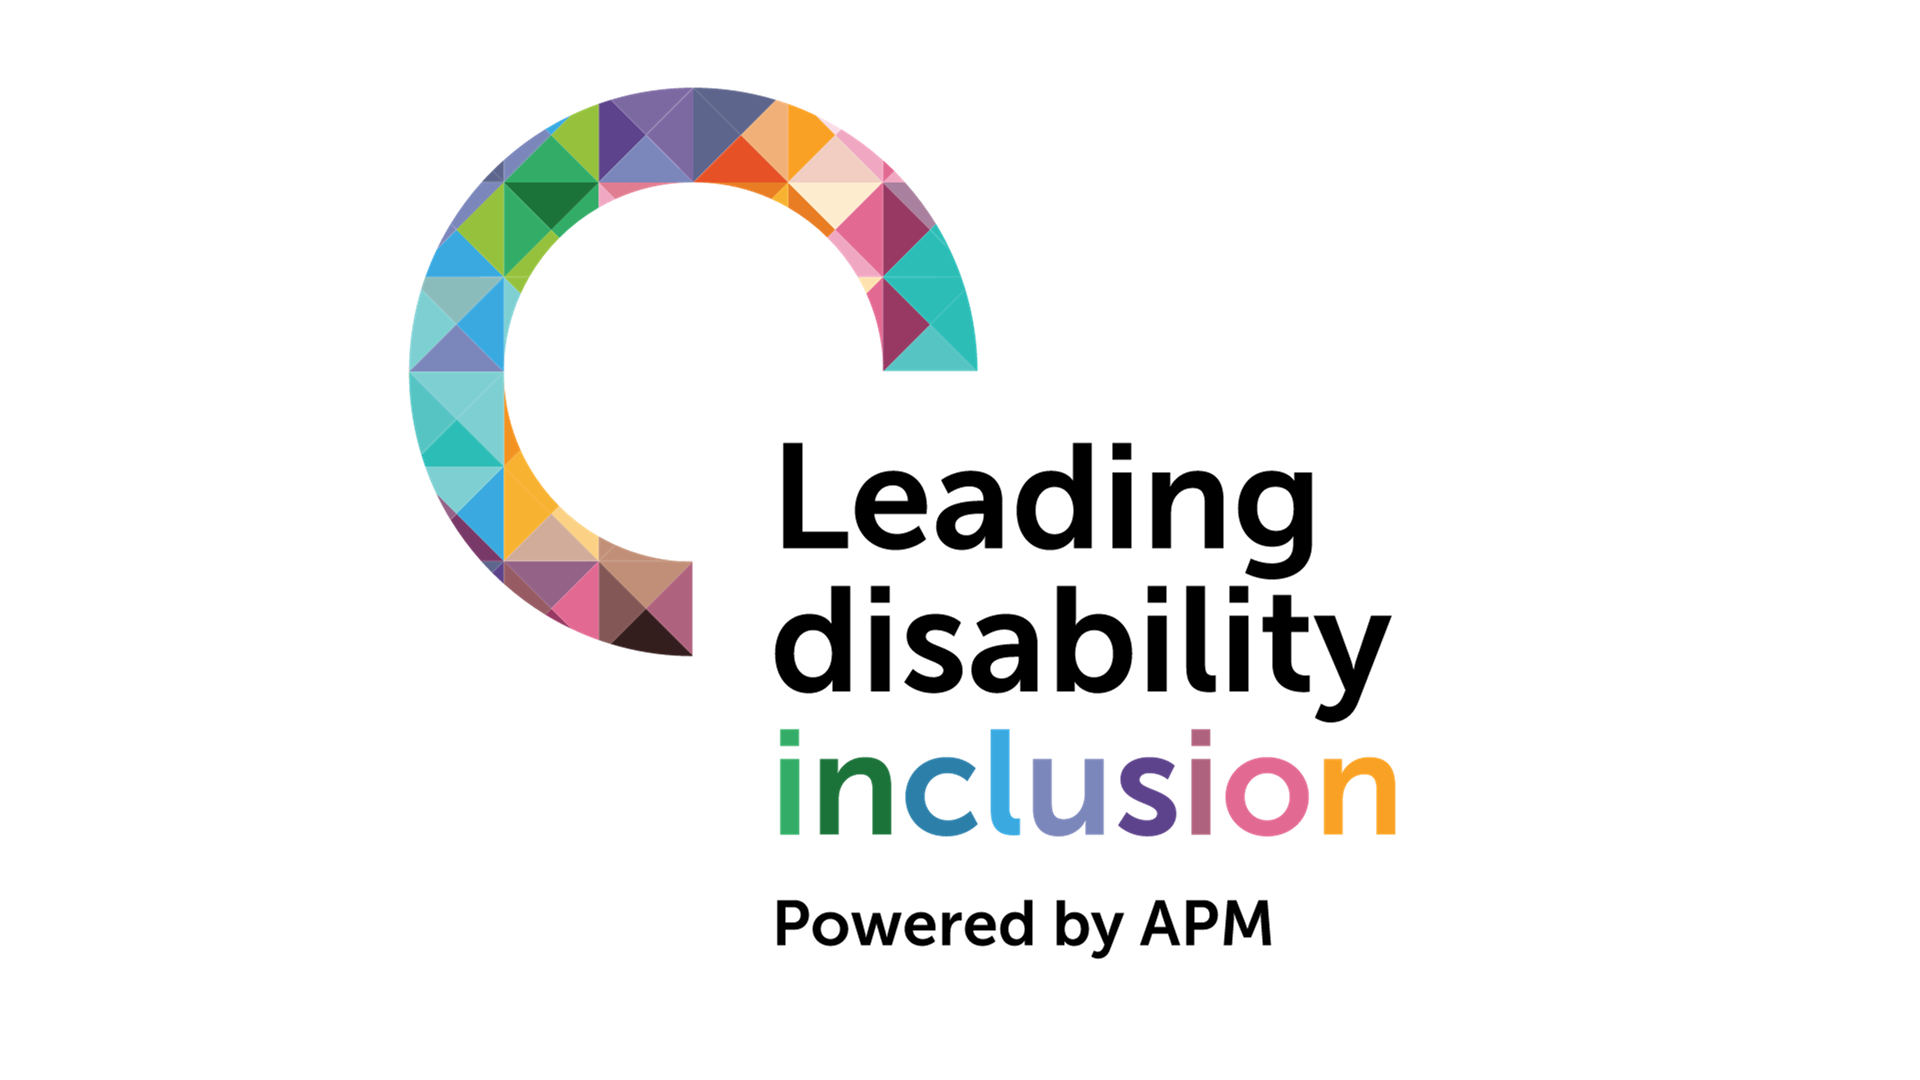 Leading disability inclusion